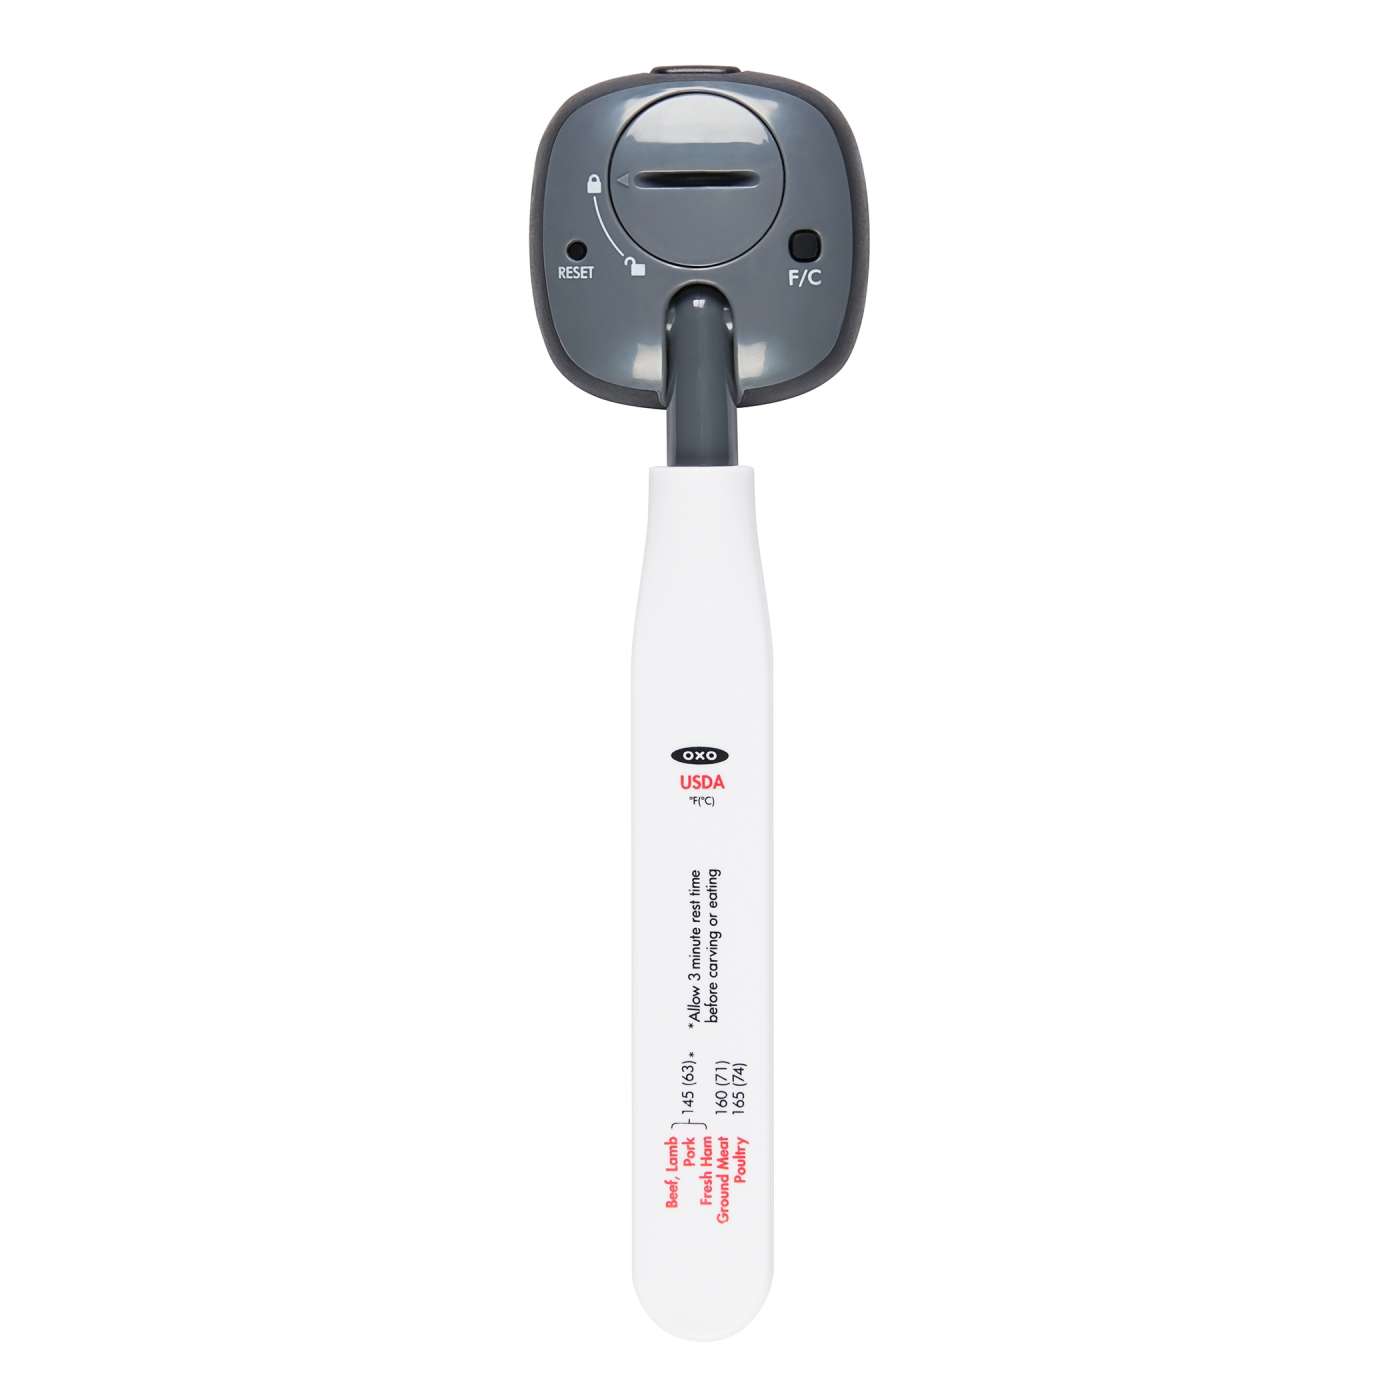 OXO Chef's Precision Analog Instant Read Thermometer